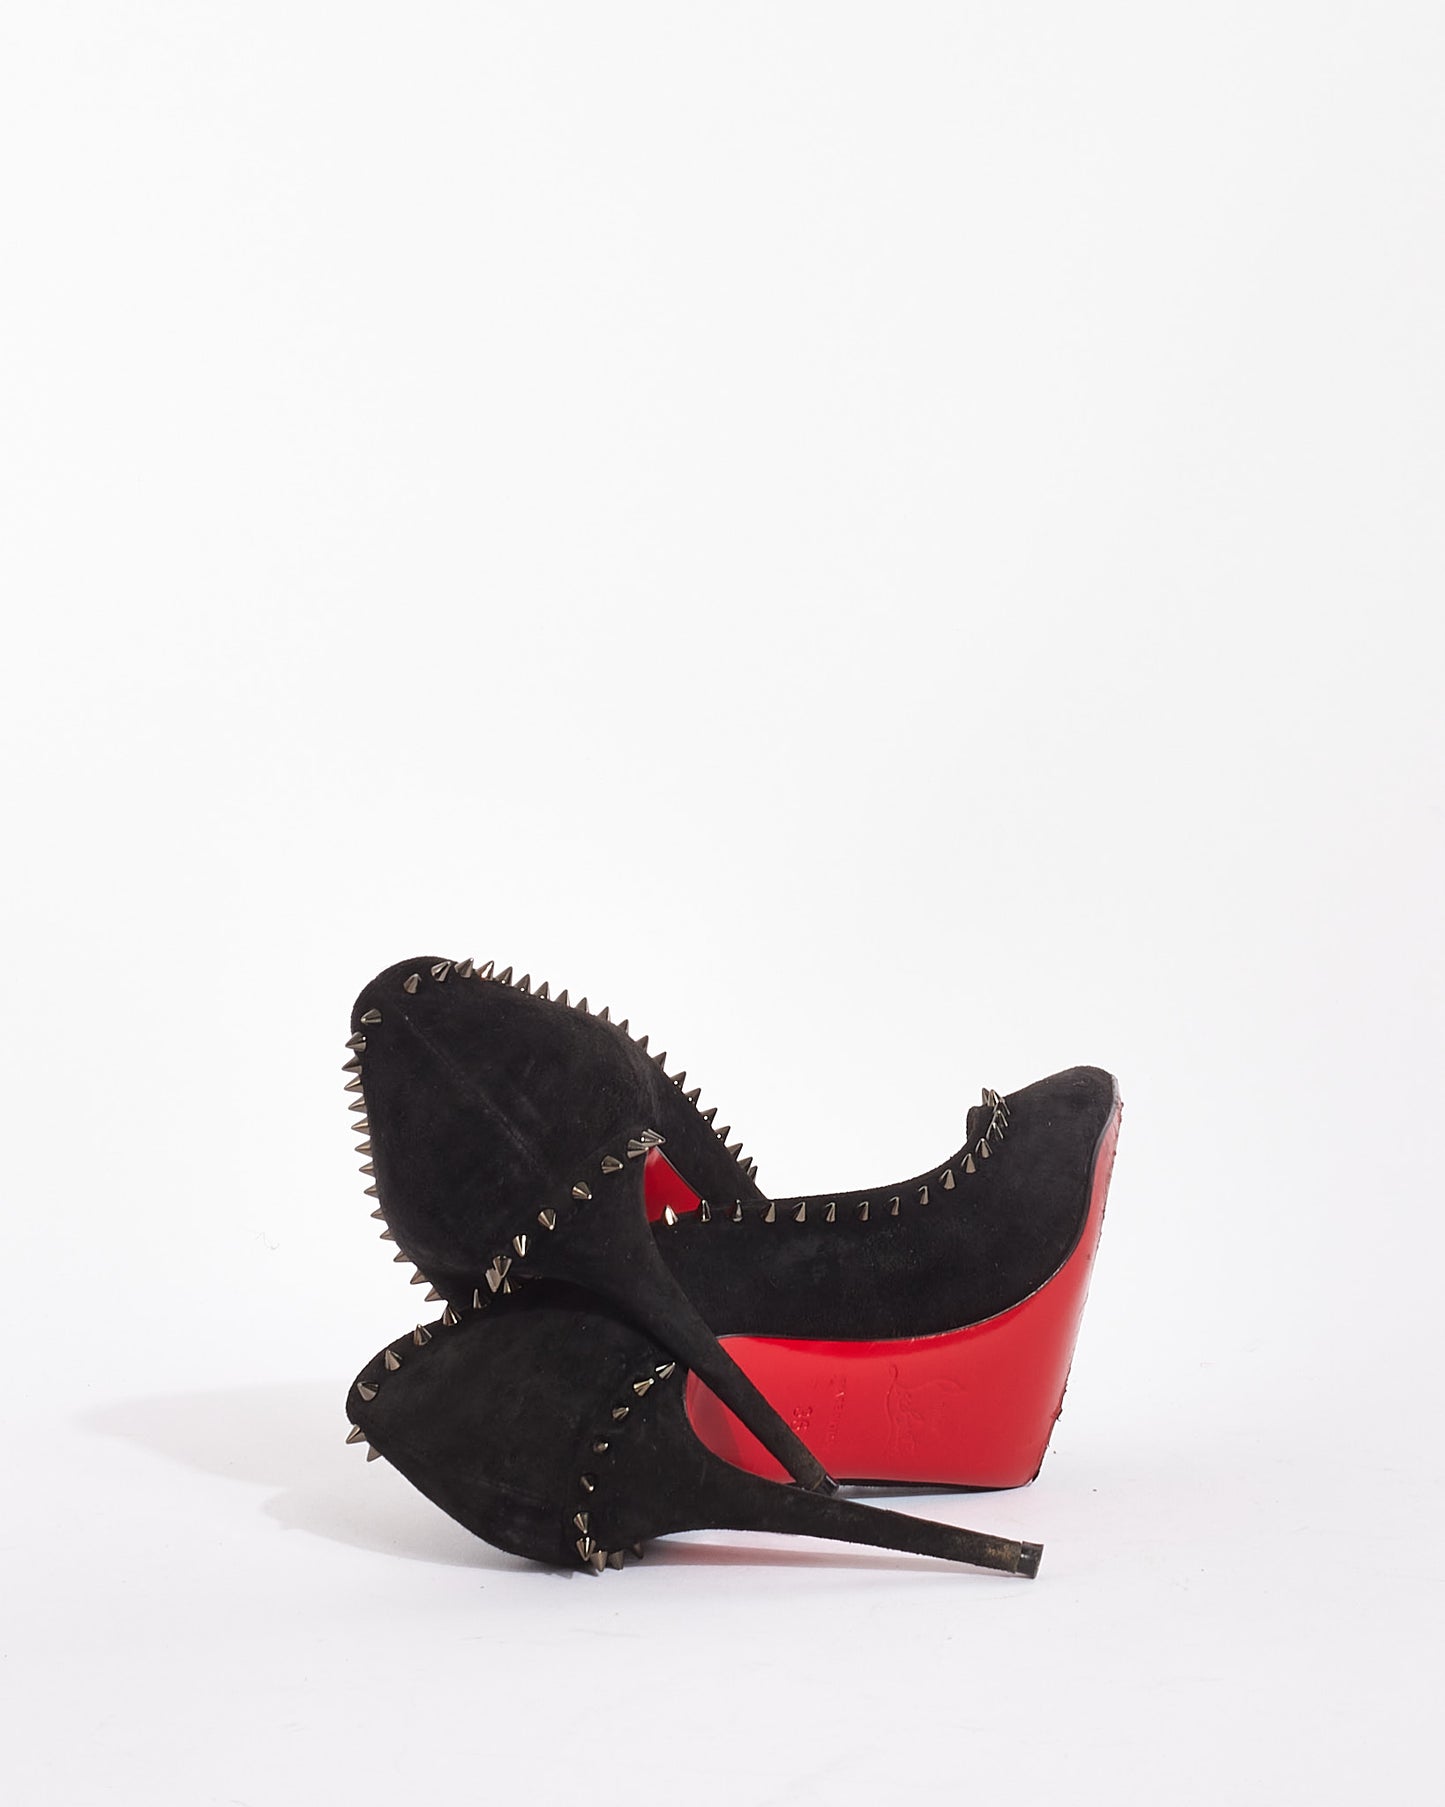 Christian Louboutin Black Suede with Spikes Anjalina 100 Pumps - 36